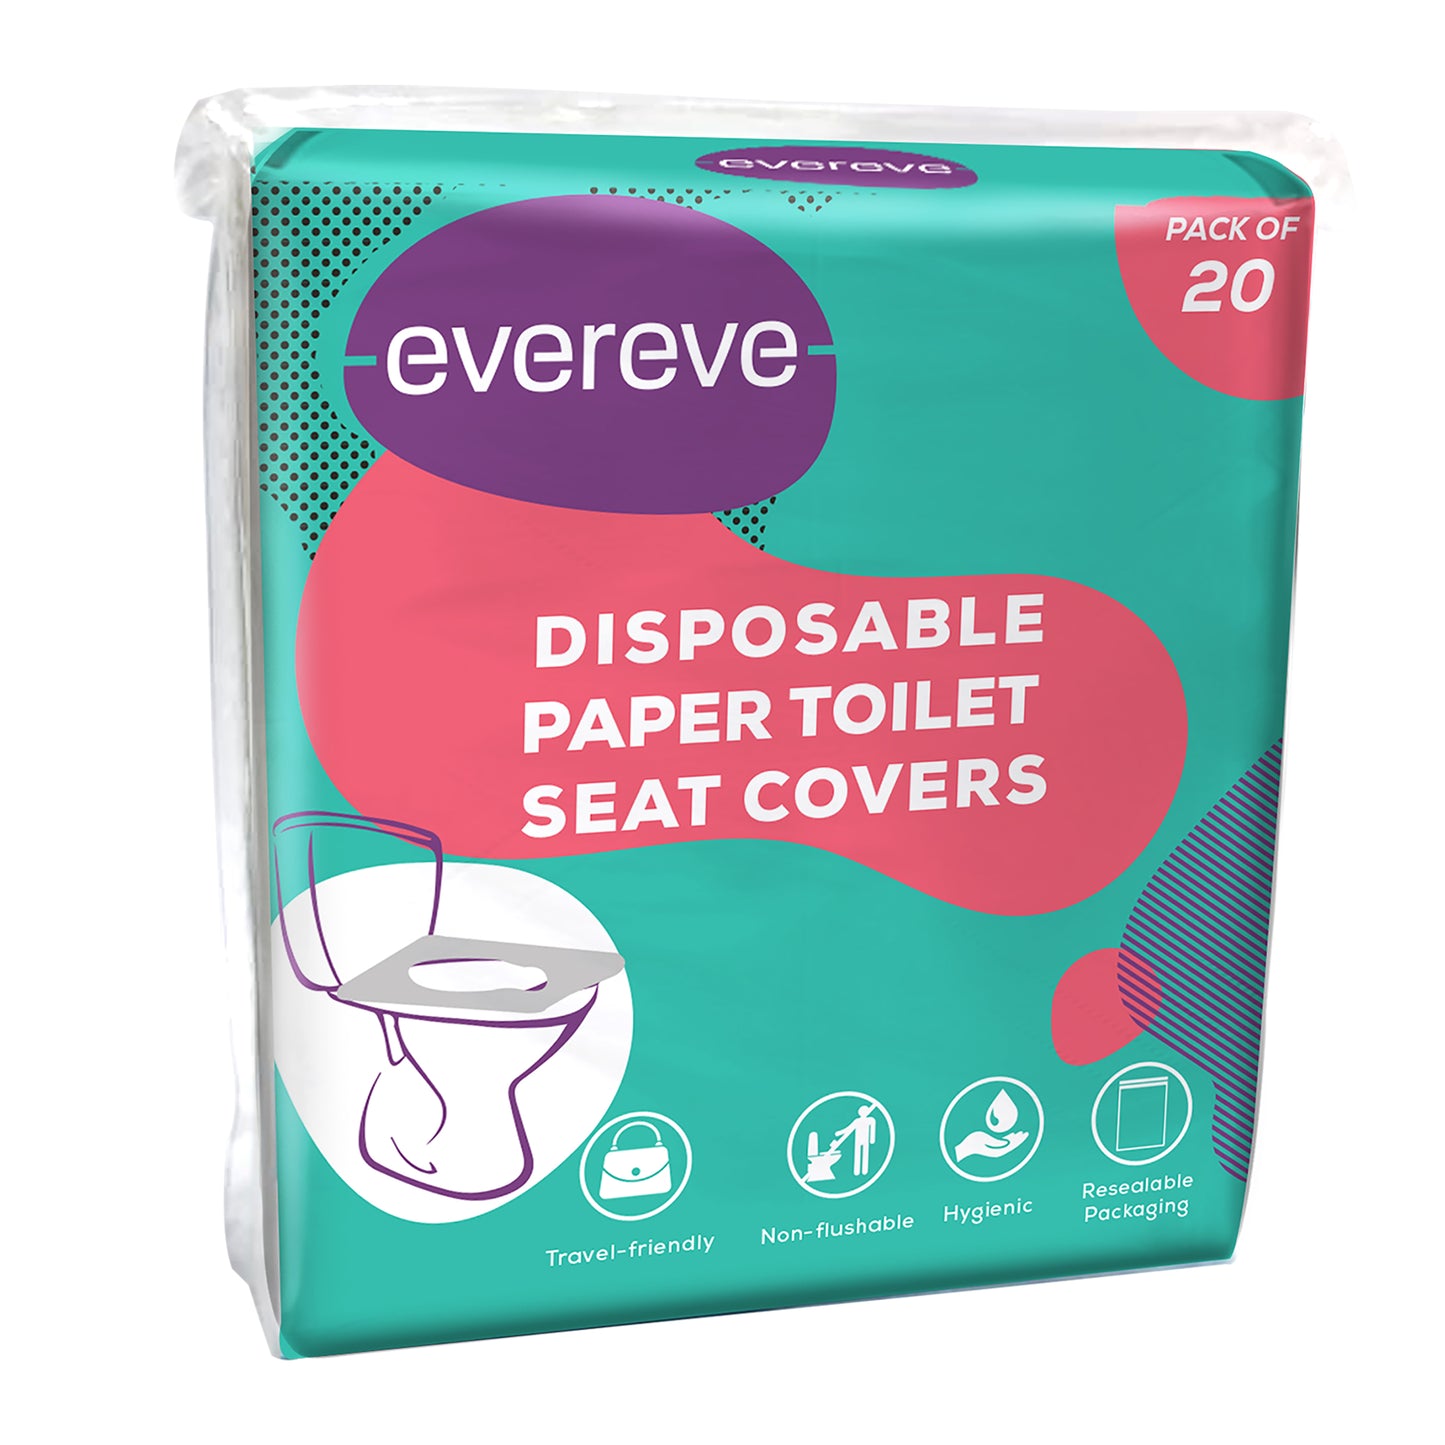 Evereve Disposable Paper Toilet Seat Covers, 20's Pack